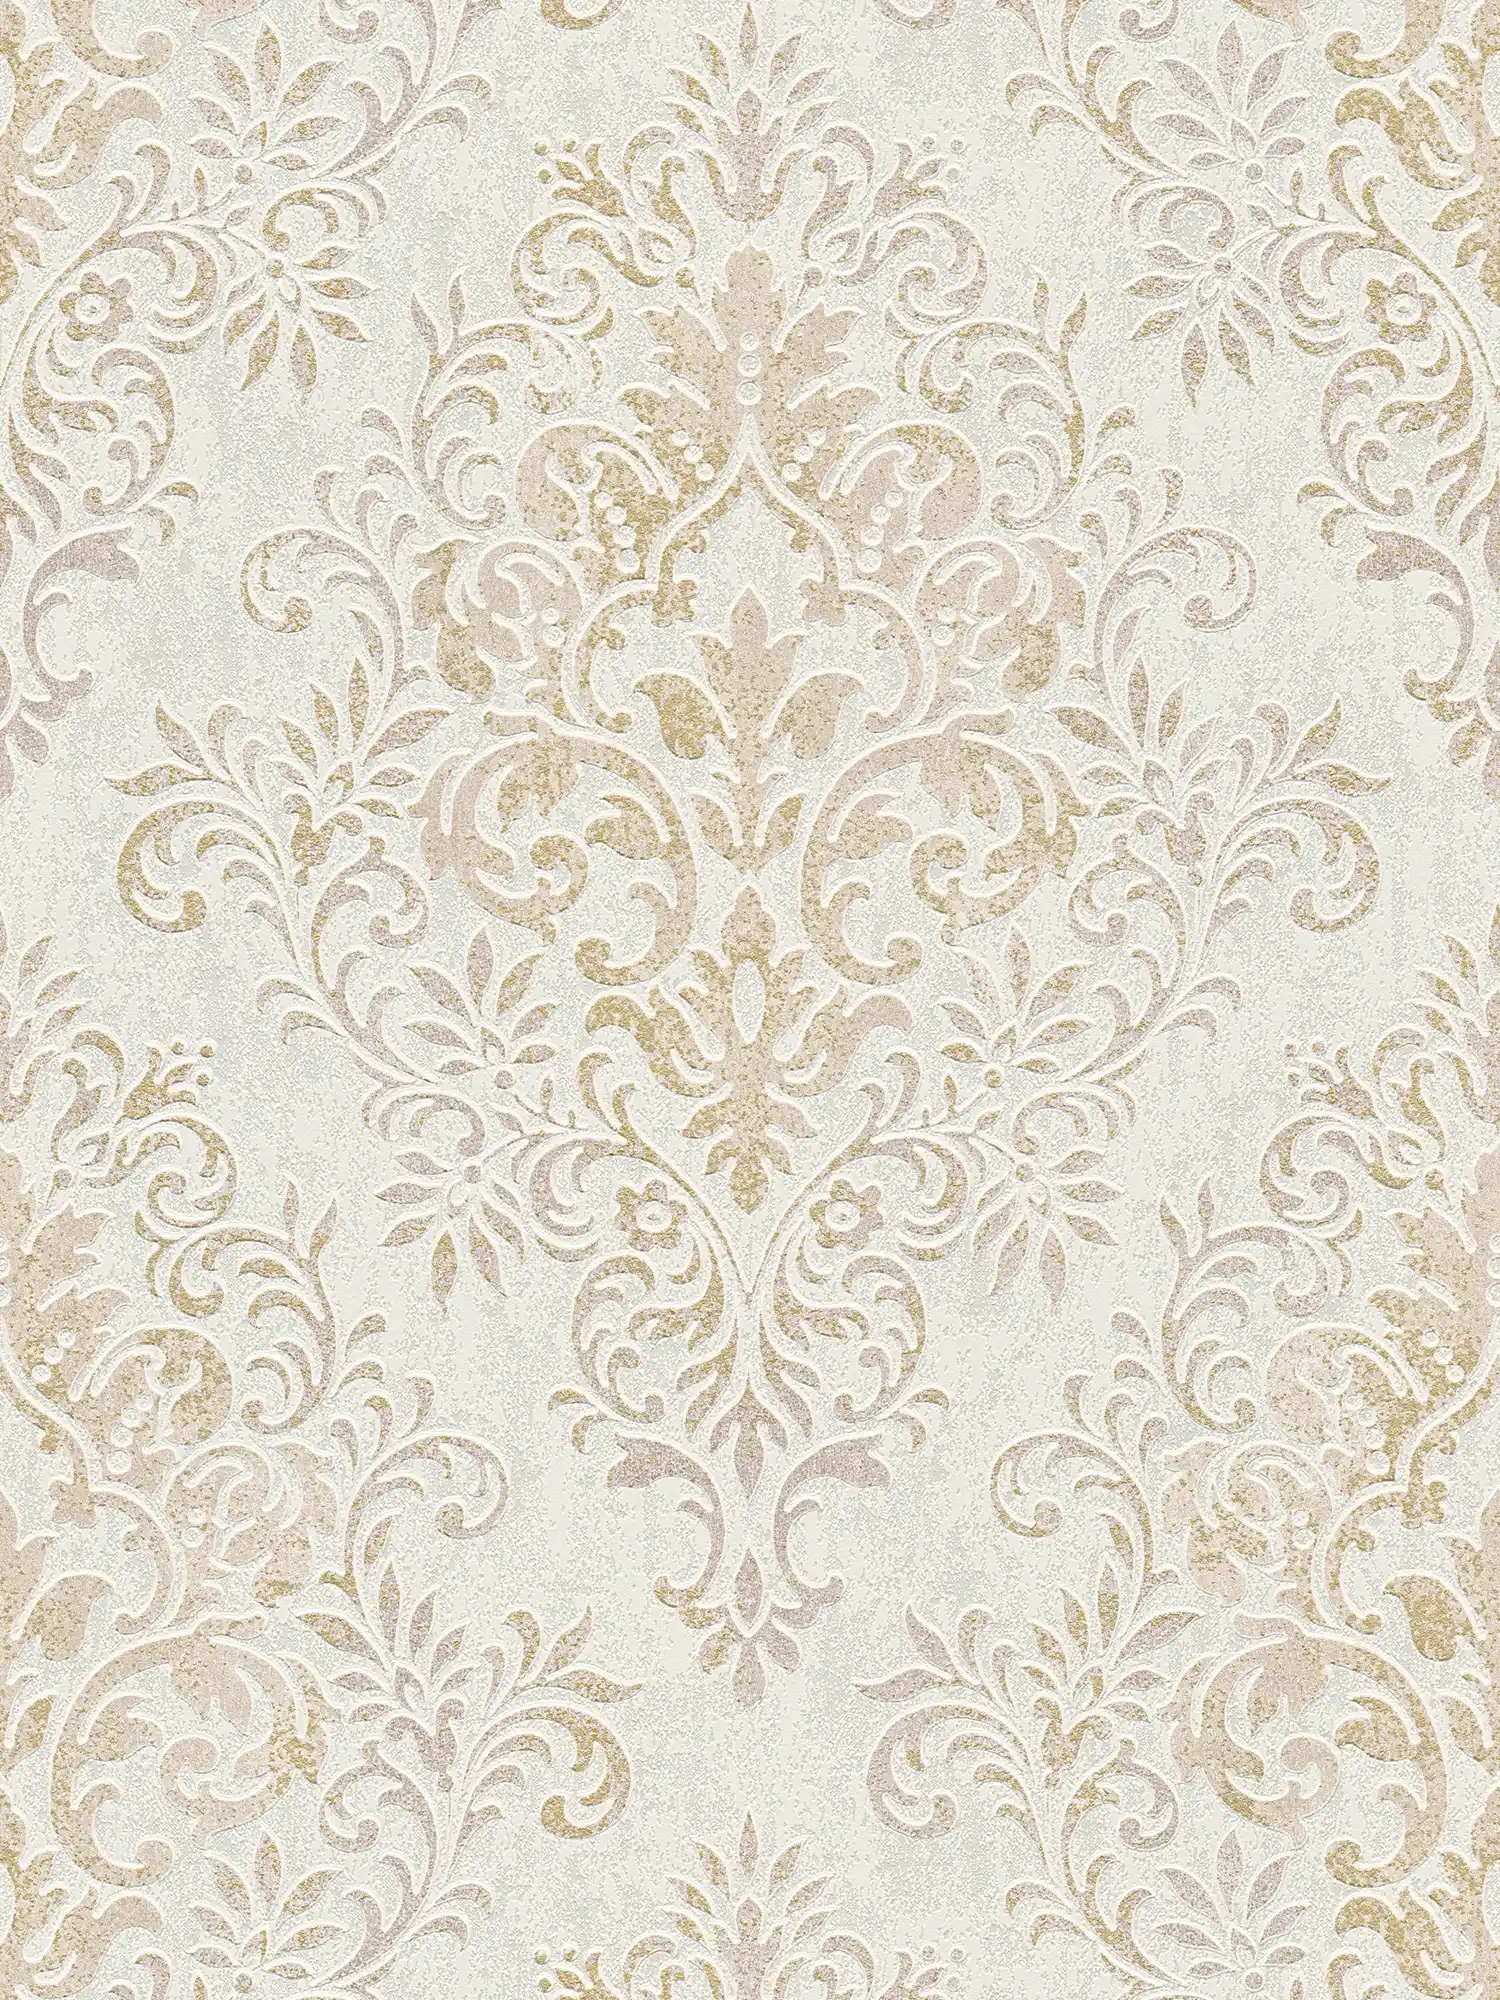 Non-woven wallpaper ornaments with gold accent & used look - beige, brown, metallic
